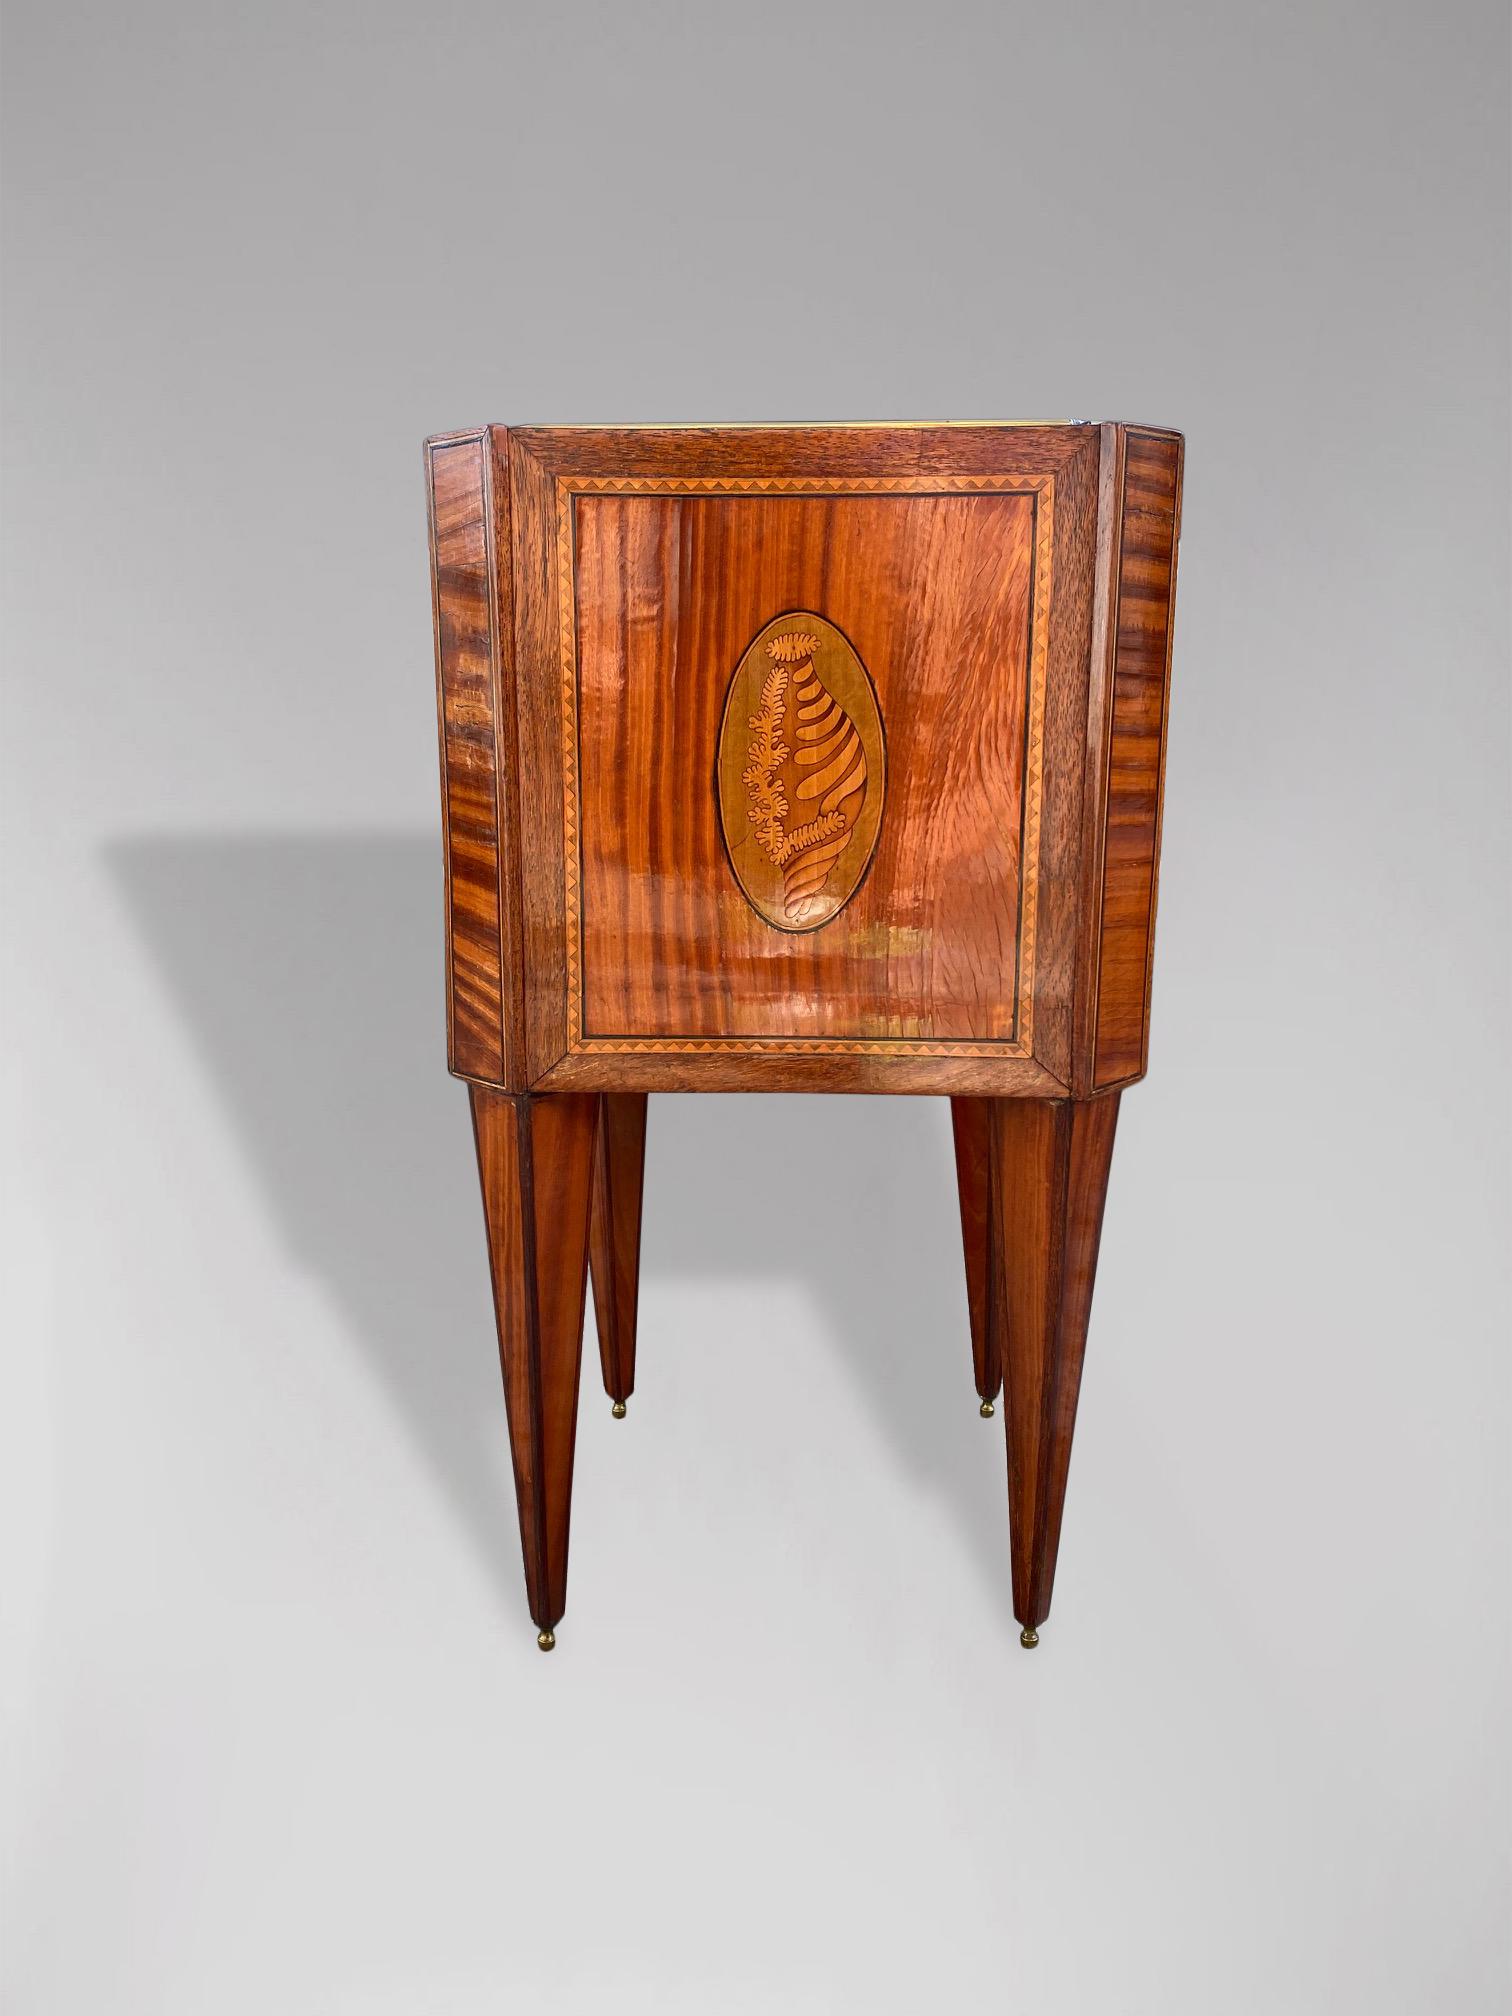 20th Century Edwardian Period Mahogany and Marquetry Jardinière In Good Condition In Petworth,West Sussex, GB